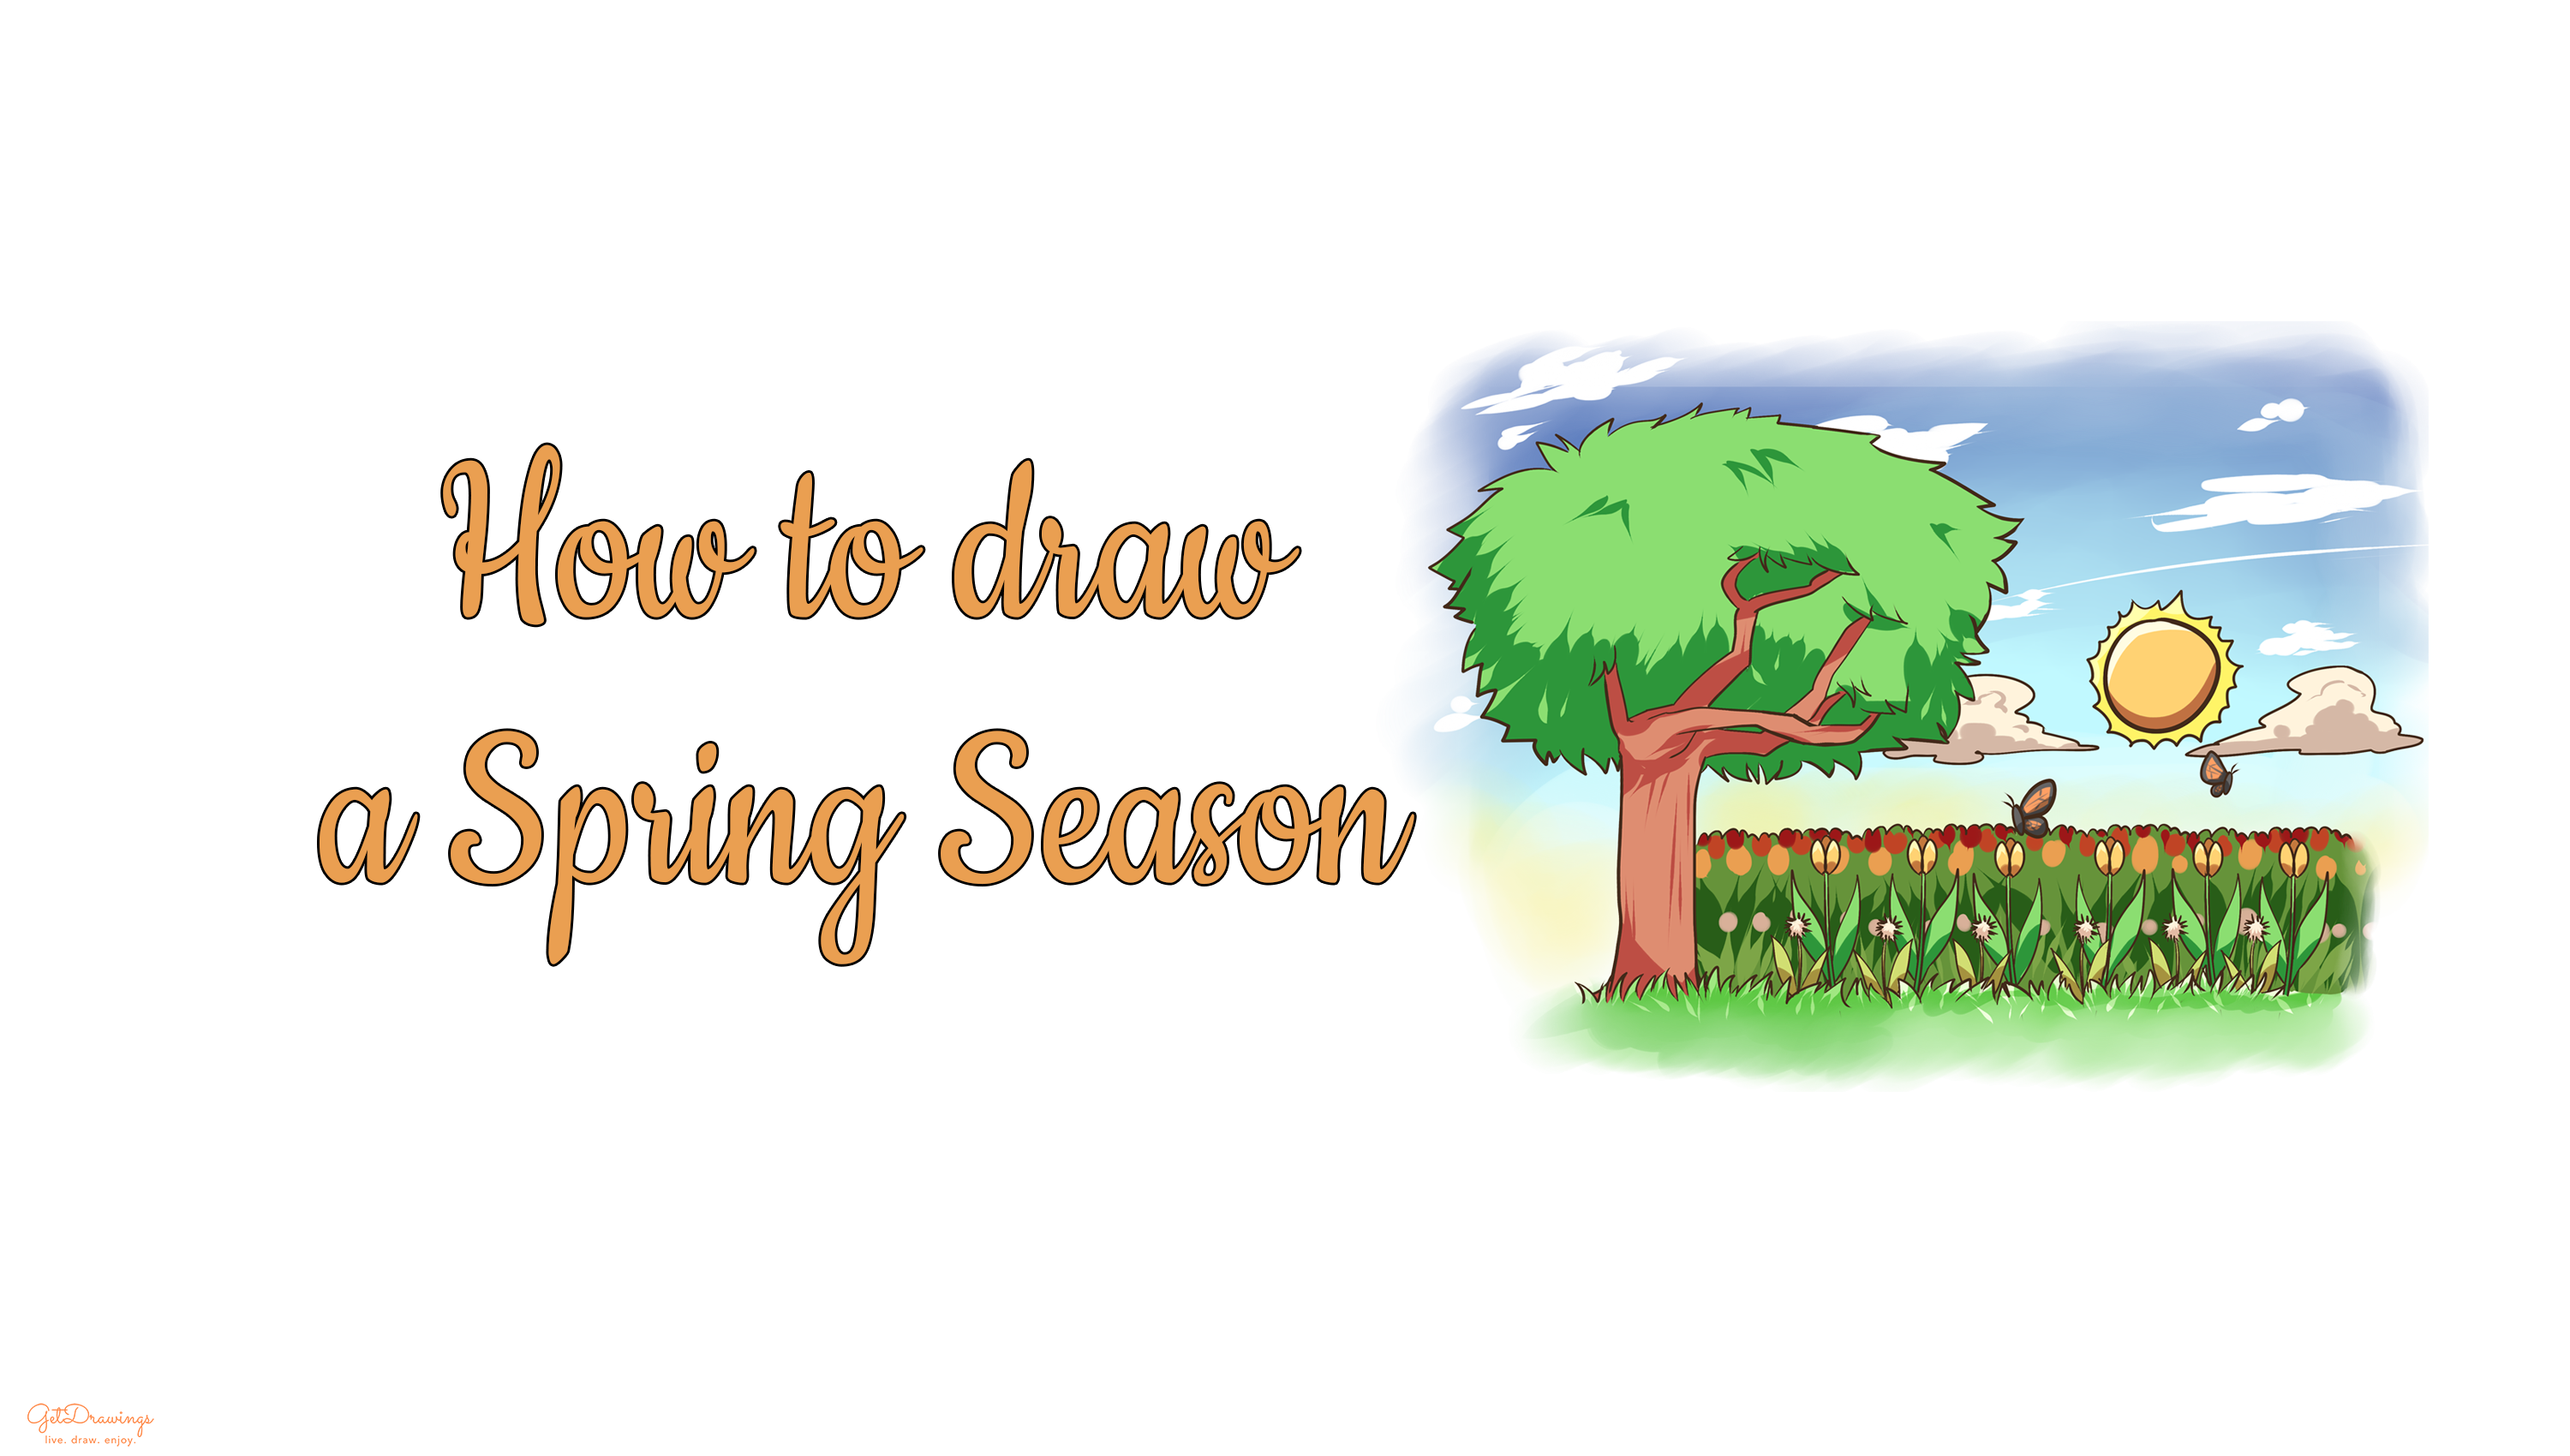 How to draw a Spring Season?